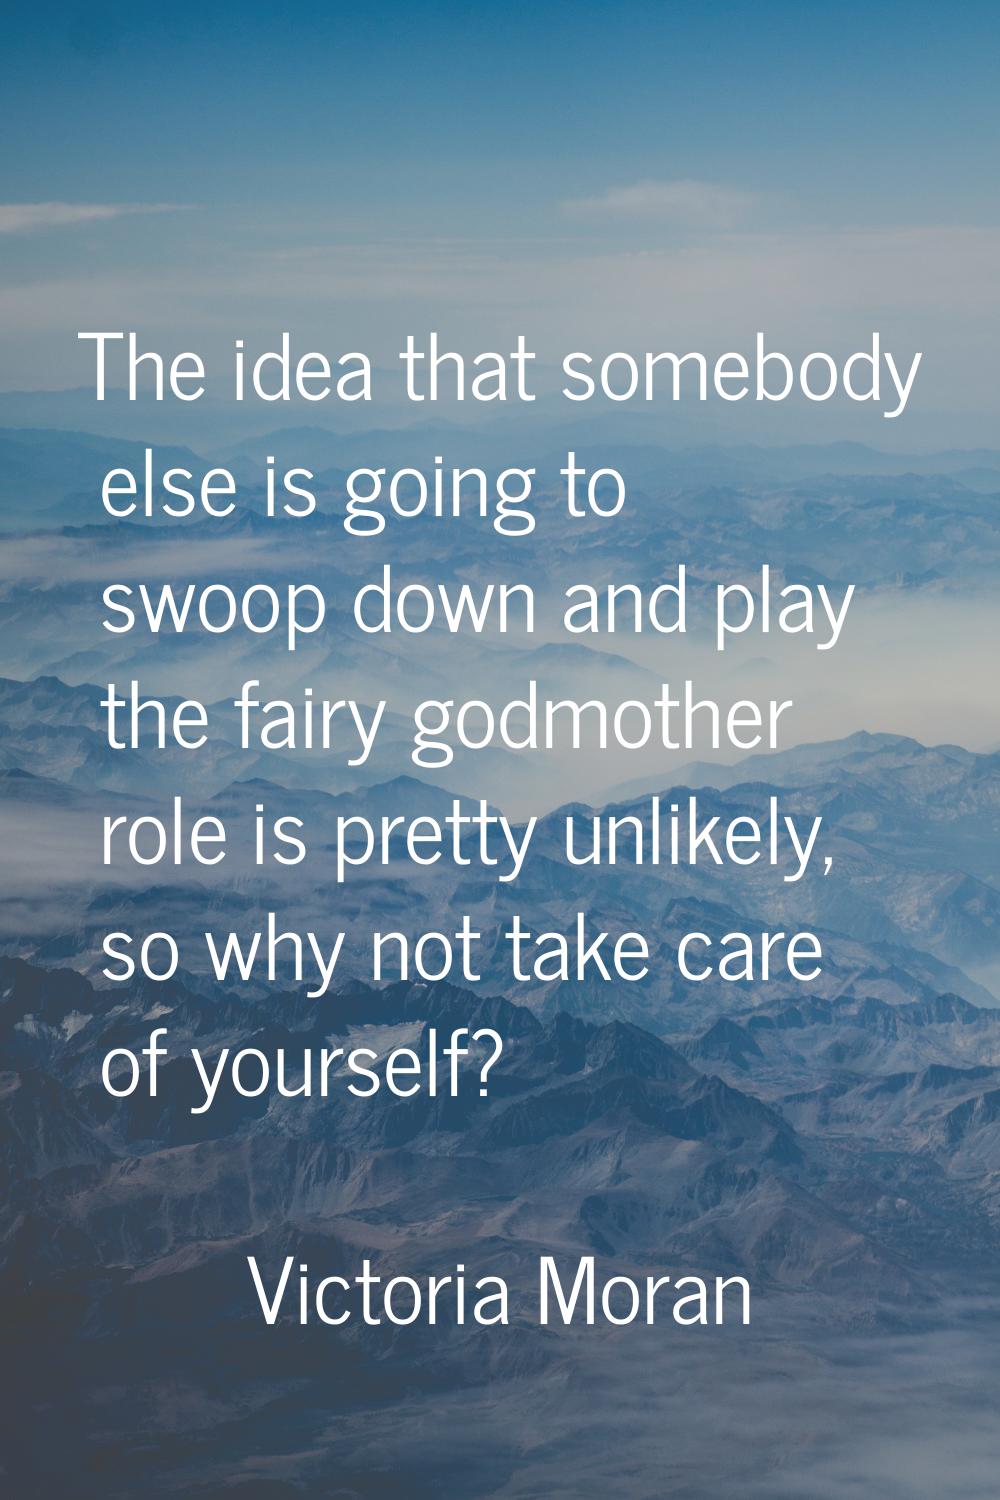 The idea that somebody else is going to swoop down and play the fairy godmother role is pretty unli